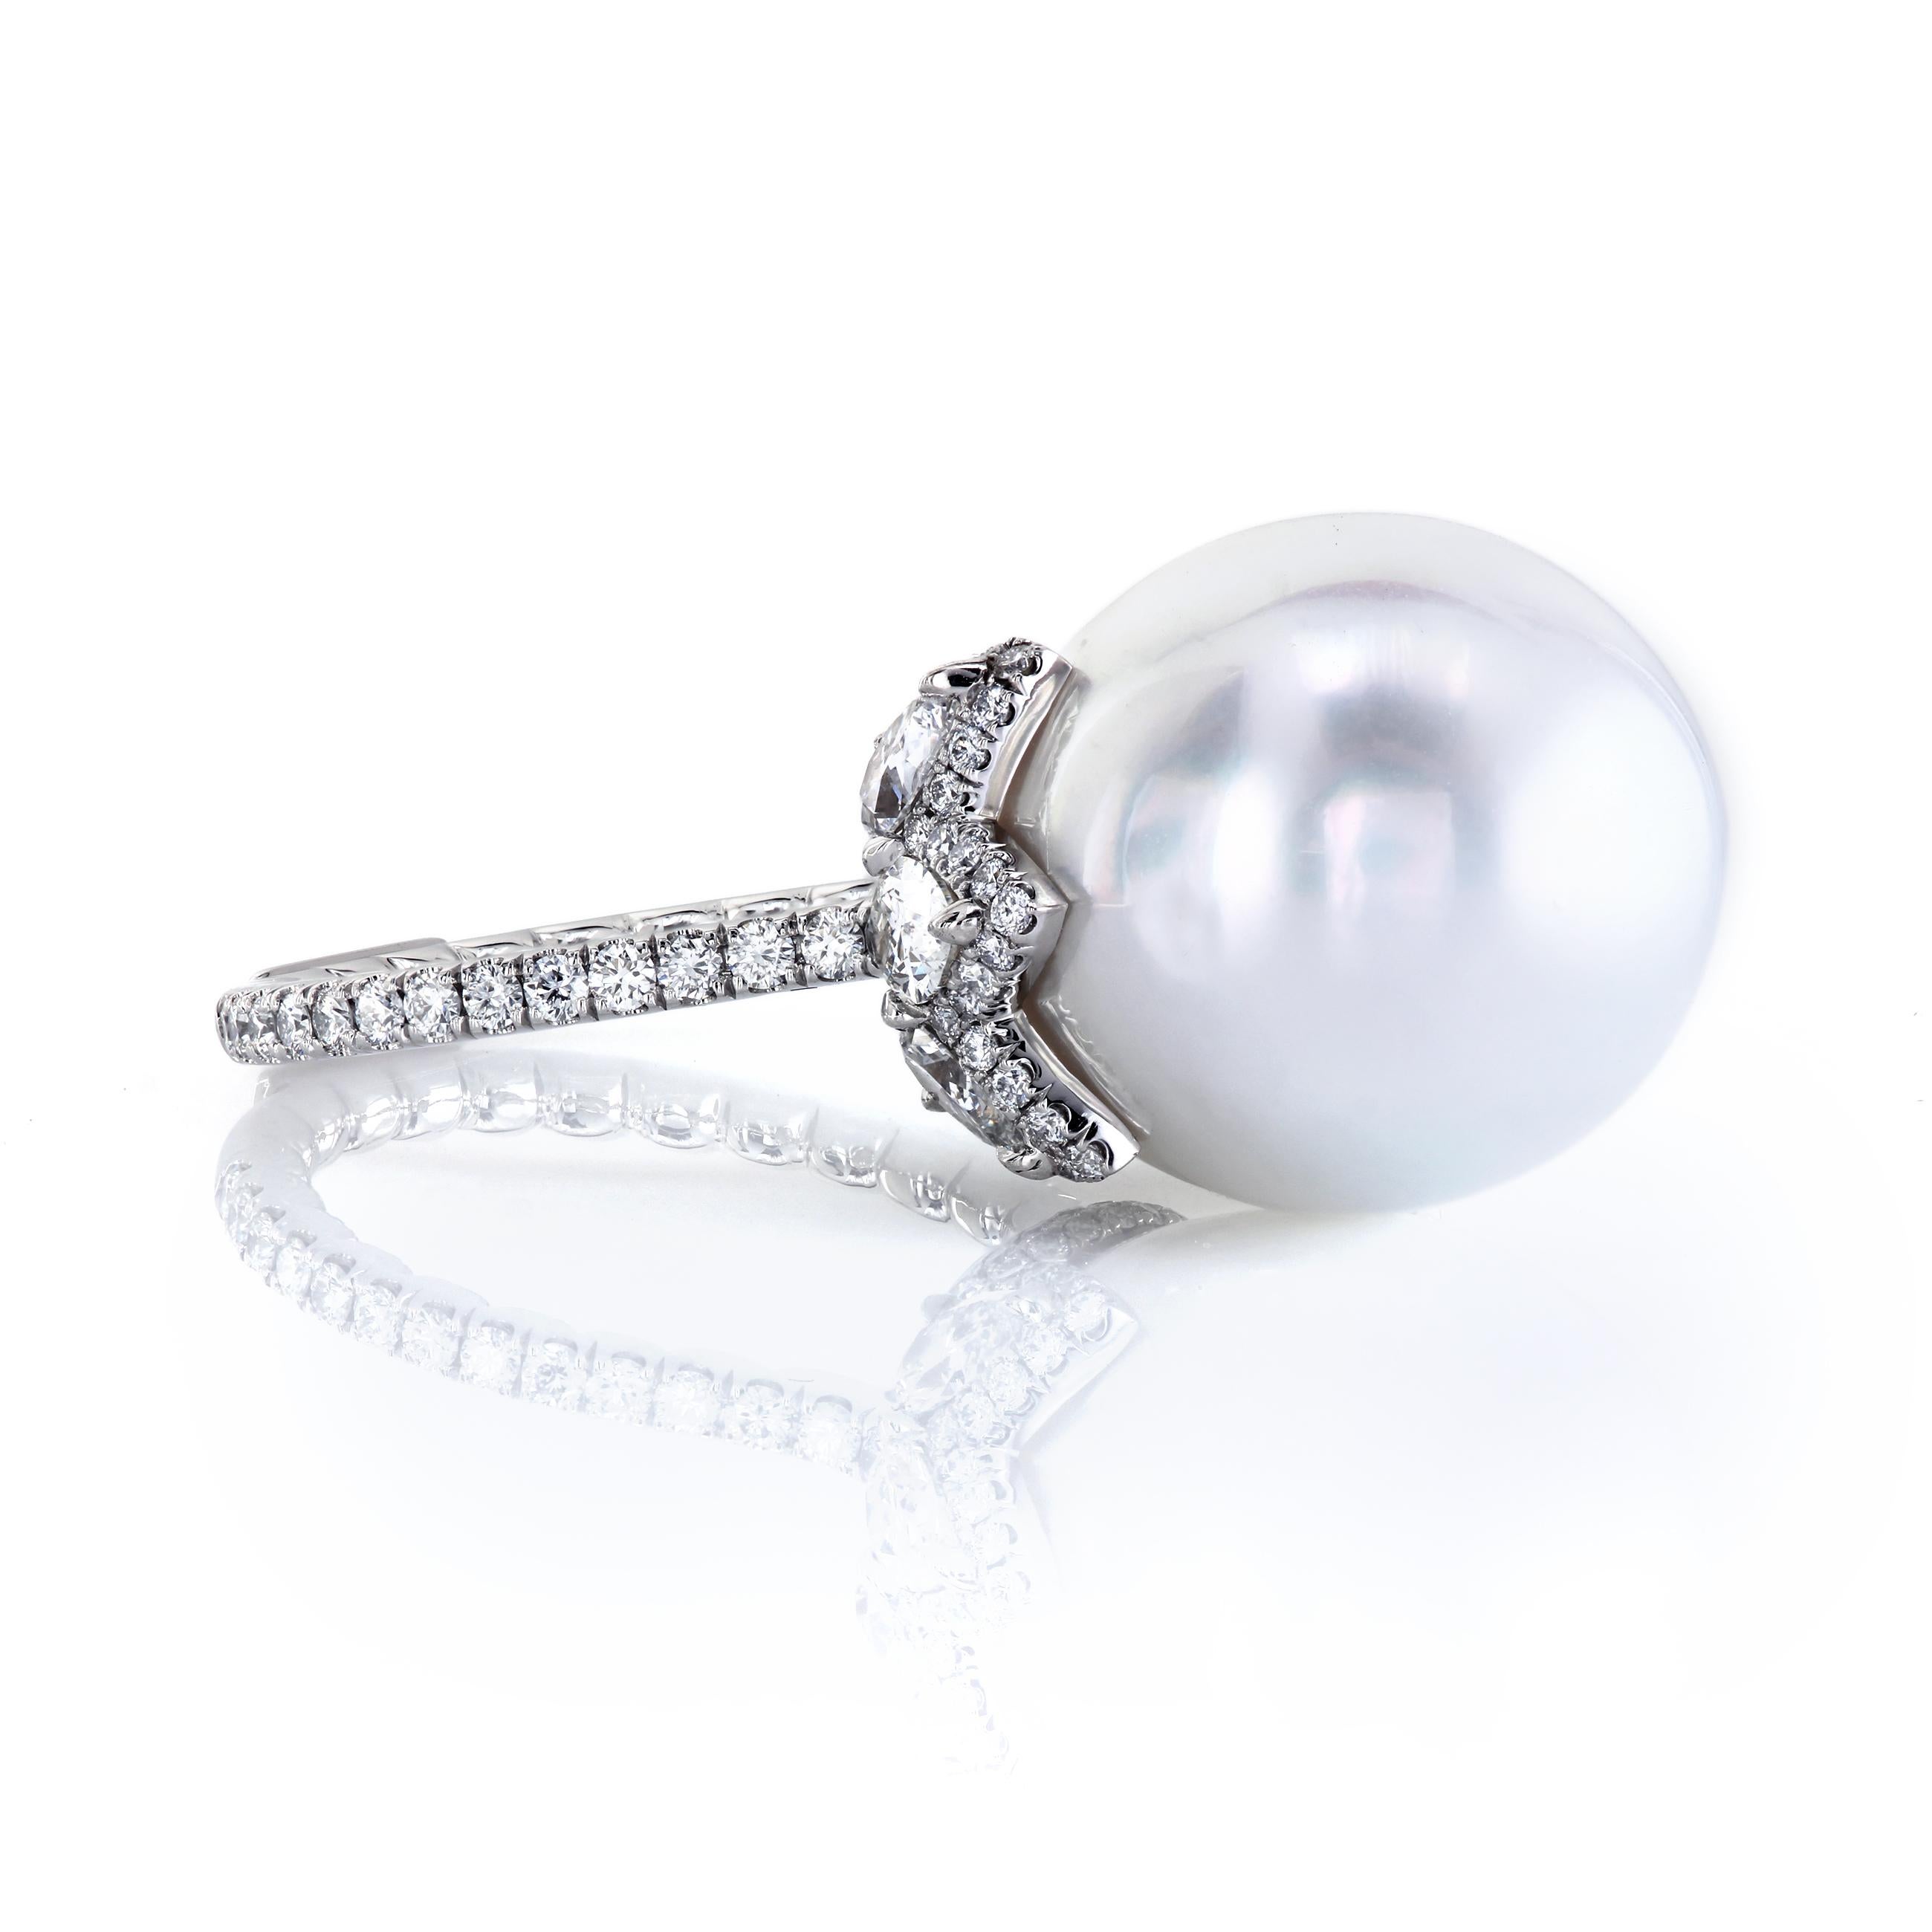 Stunning and elegant platinum ring. The beautiful combination of the slightly elongated pearl and the fiery of diamonds will be admired and cherished for years to come. Pearls symbolize love, success, and happiness. Look around - do you know anyone